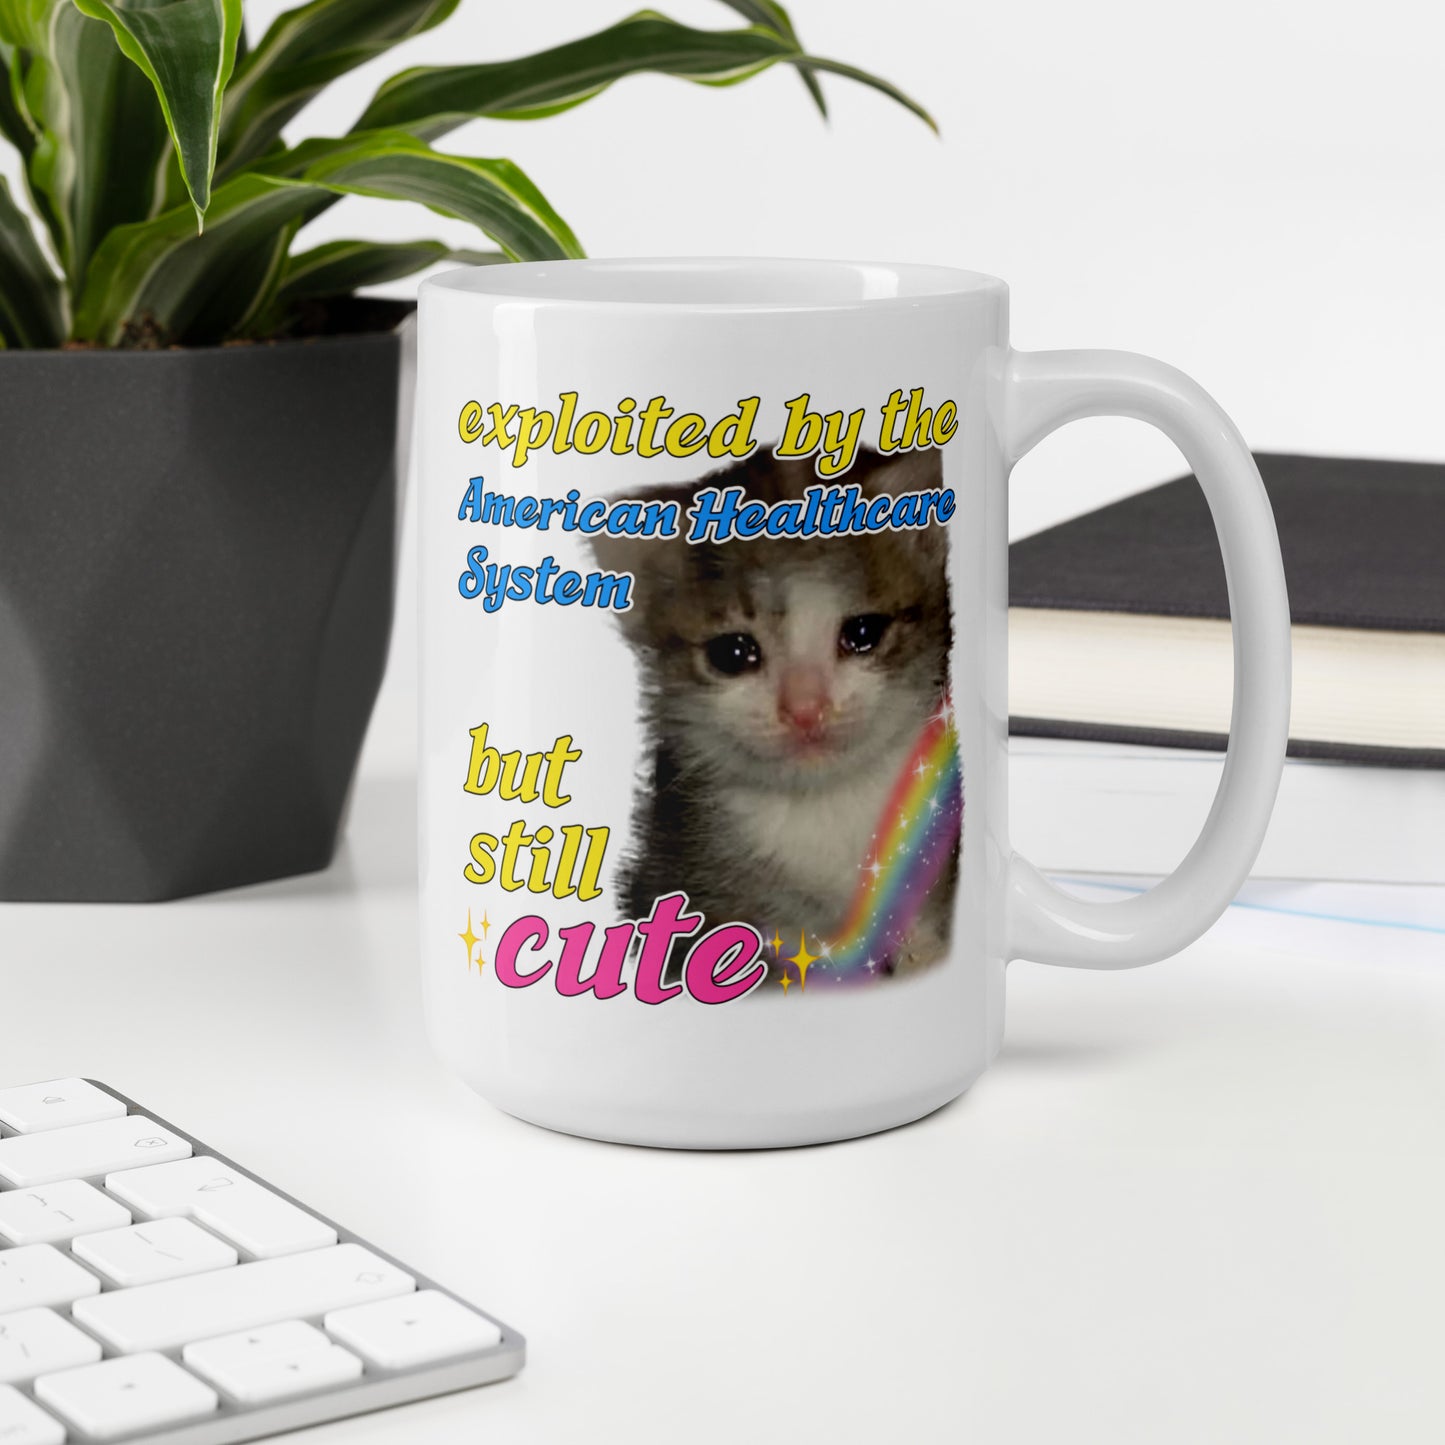 Exploited By The American Healthcare System Cat Mug